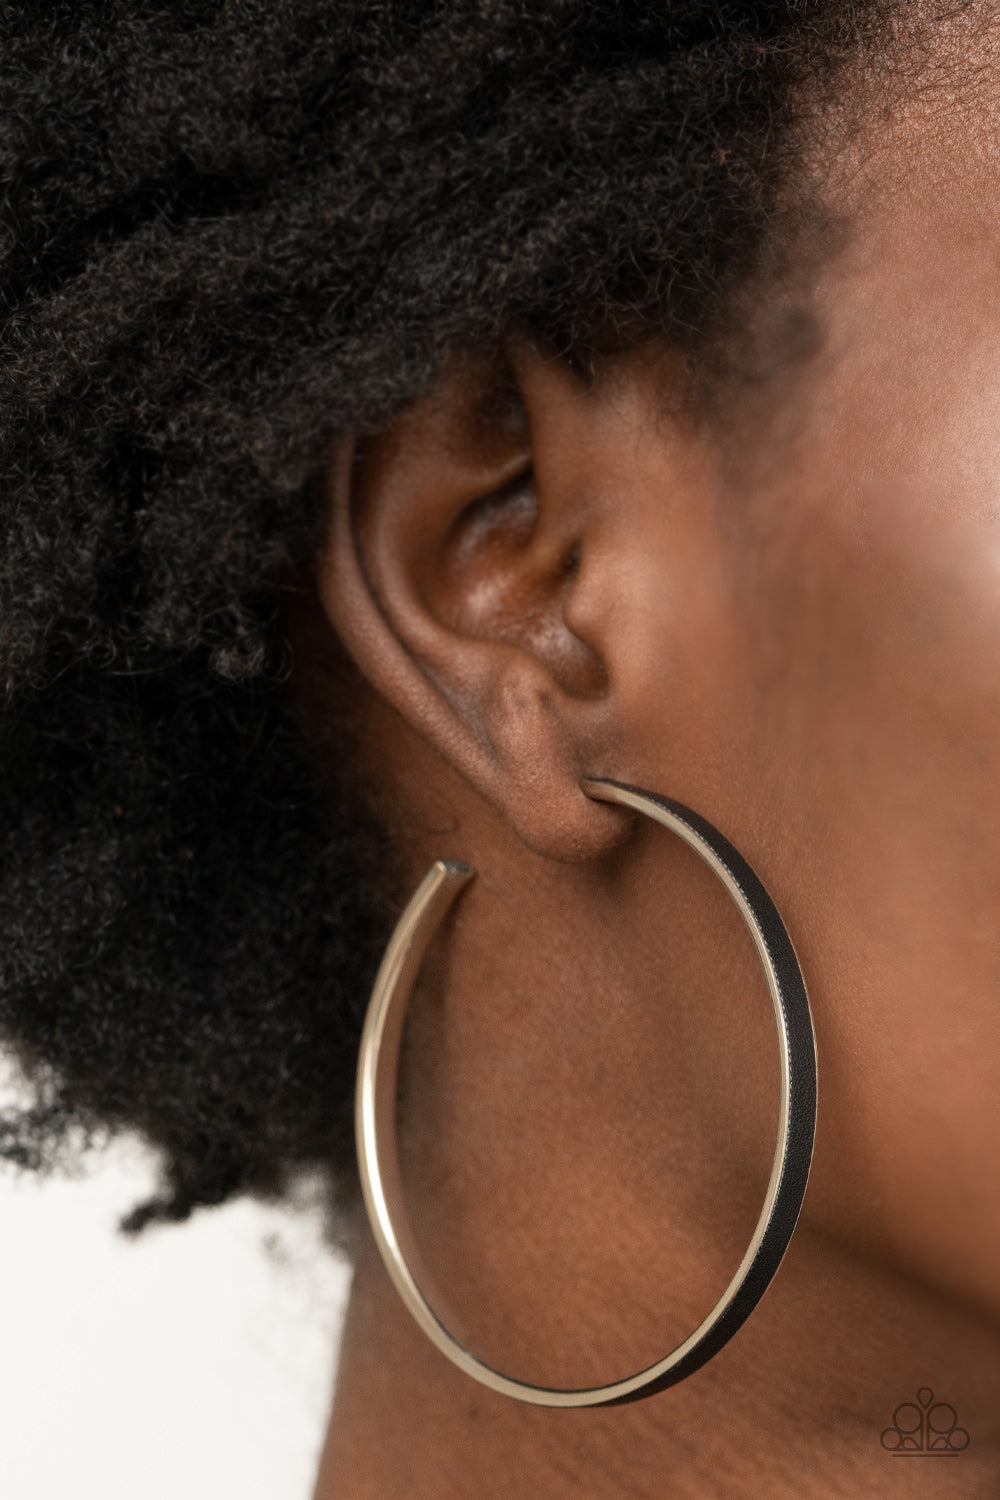 Fearless Flavor Black Hoop Earring - Paparazzi Accessories  A black leather lace is pressed along the indented spine of a silver hoop, creating a bold pop of color. Earring attaches to a standard post fitting. Hoop measures approximately 2 1/4" in diameter.  All Paparazzi Accessories are lead free and nickel free!  Sold as one pair of hoop earrings.